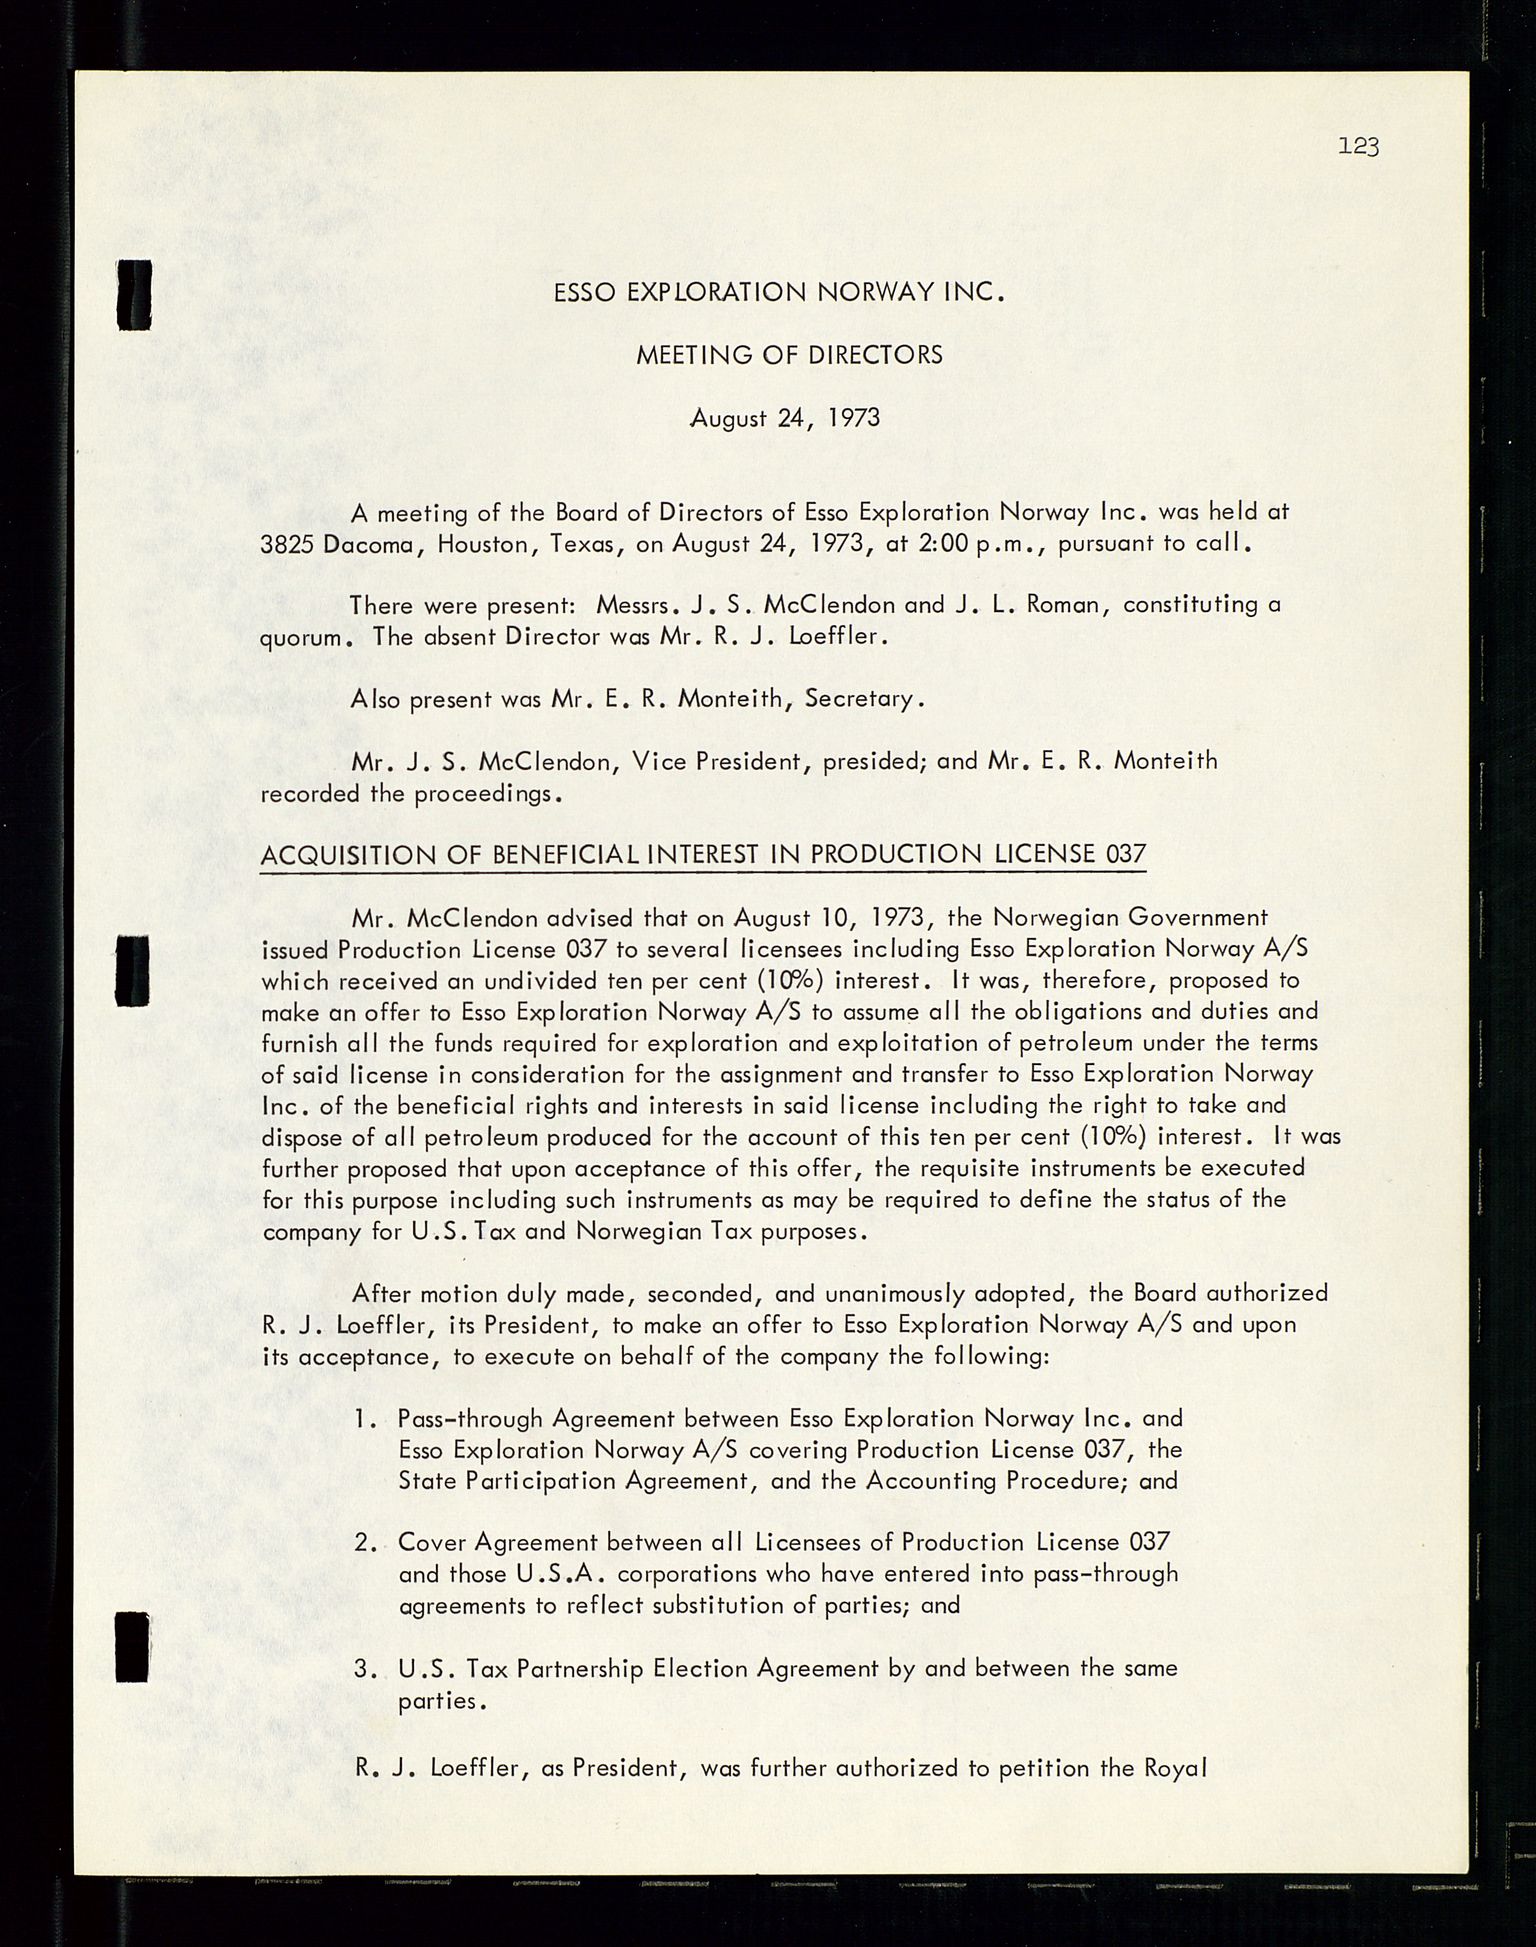 Pa 1512 - Esso Exploration and Production Norway Inc., SAST/A-101917/A/Aa/L0001/0001: Styredokumenter / Corporate records, By-Laws, Board meeting minutes, Incorporations, 1965-1975, s. 123